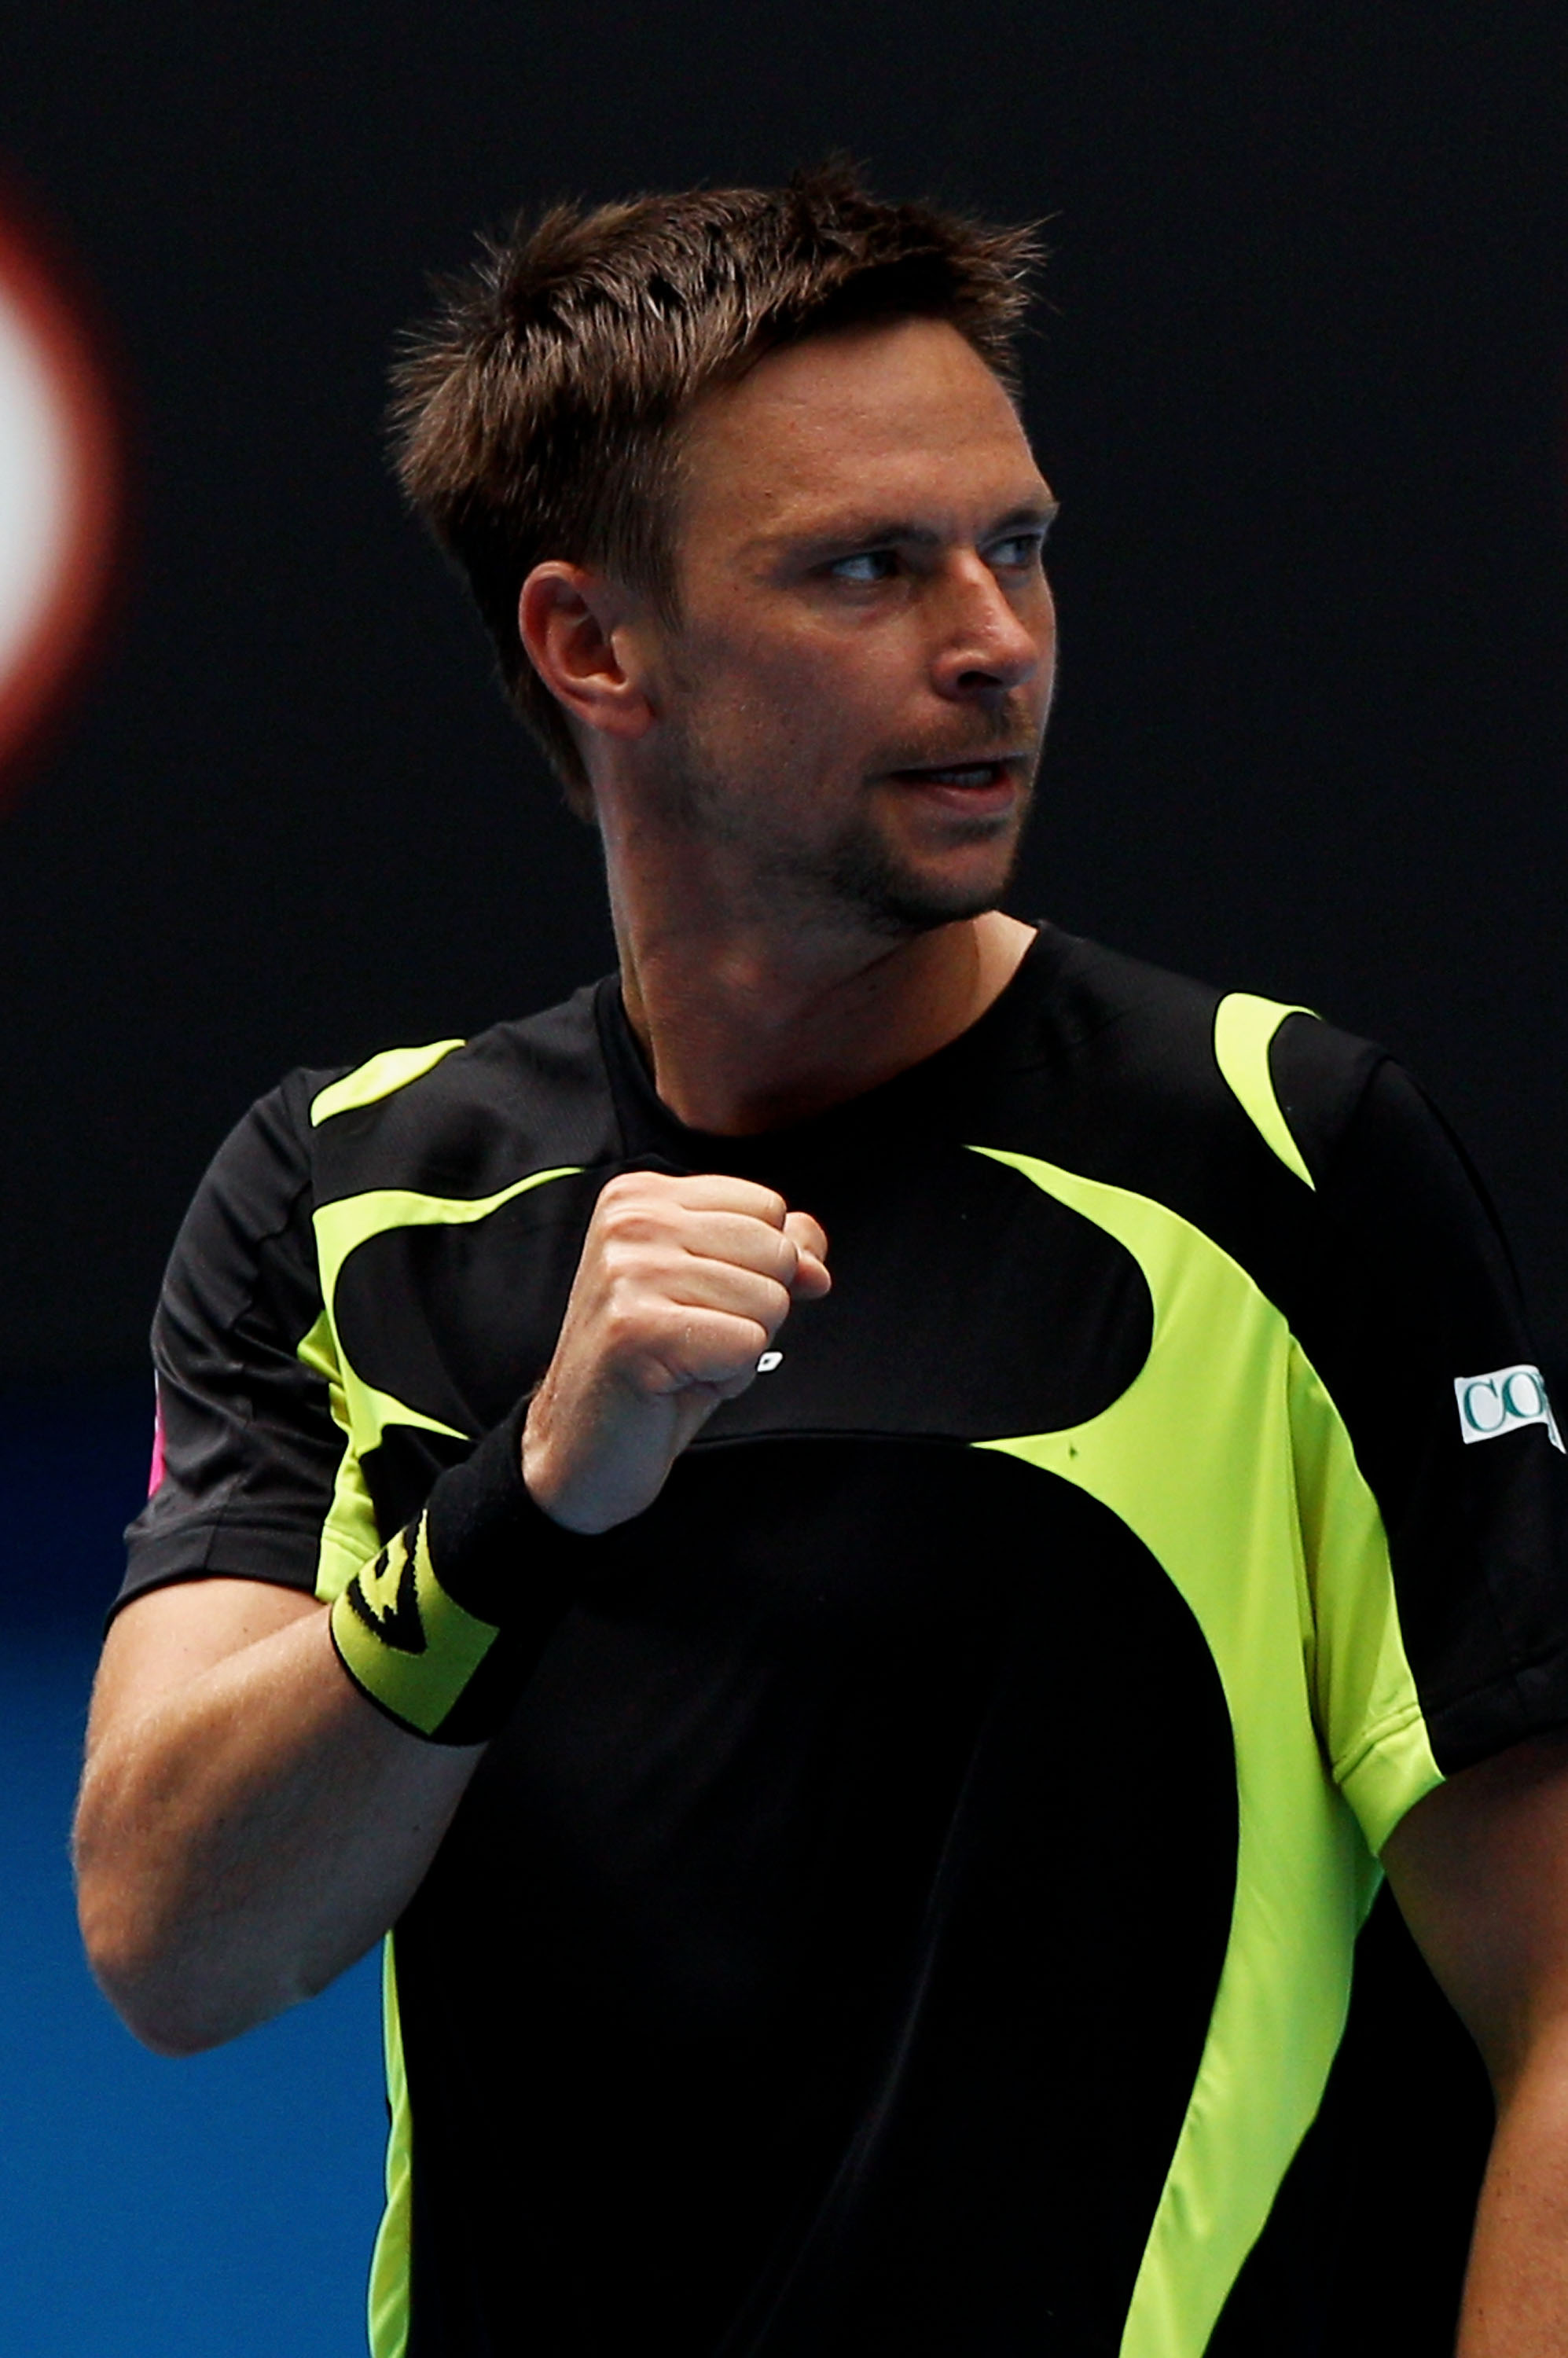 MELBOURNE, AUSTRALIA - JANUARY 24:  Robin Soderling of Sweden celebrates winning a point in his fourth round match against Alexandr Dolgopolov of the Ukraine during day eight of the 2011 Australian Open at Melbourne Park on January 24, 2011 in Melbourne,